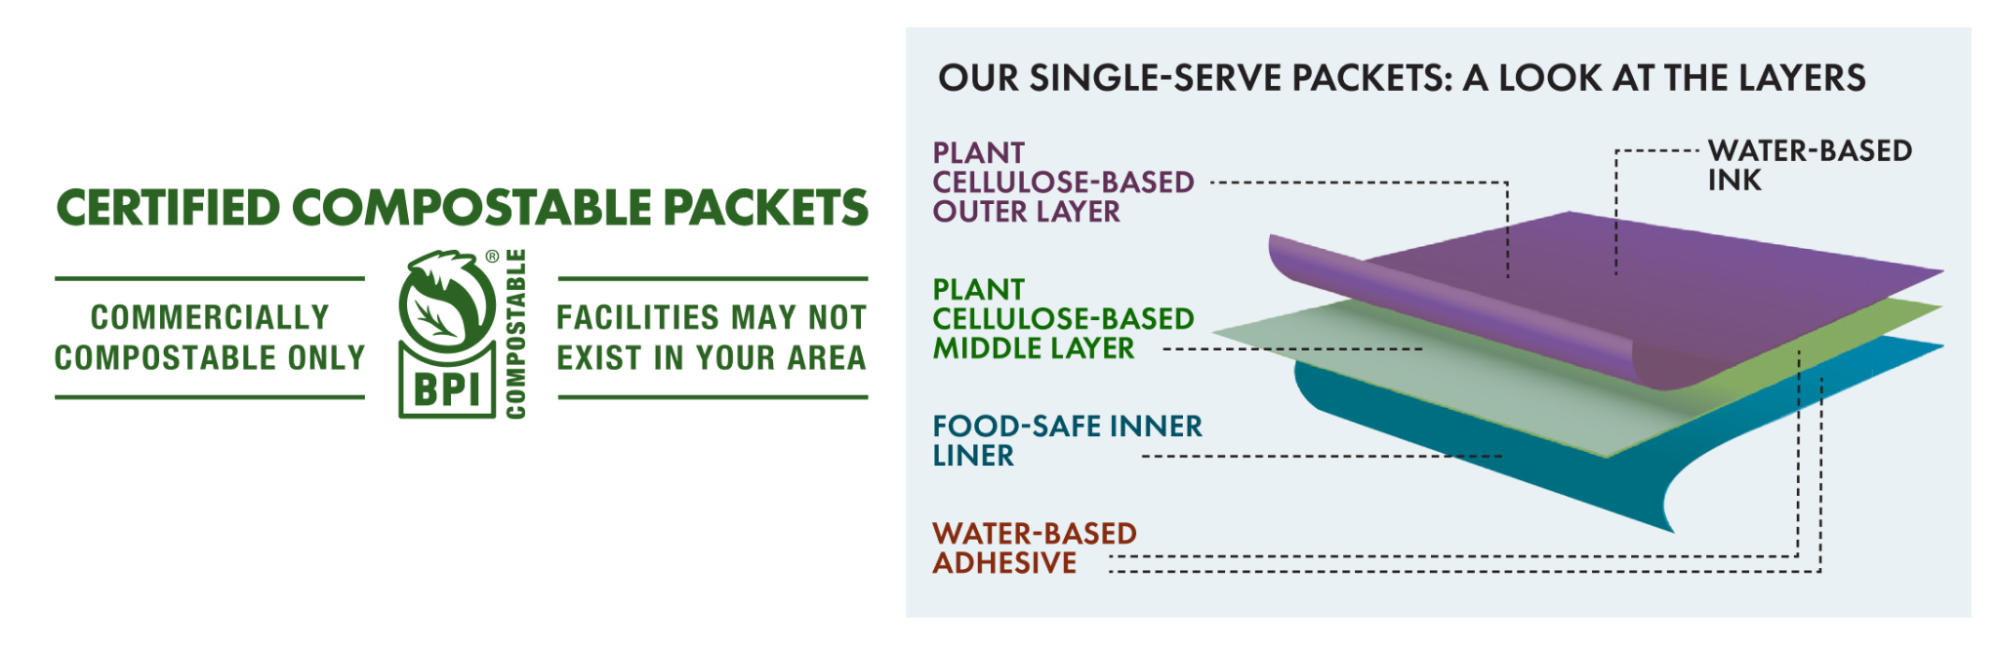 Certified Compostable packets diagram